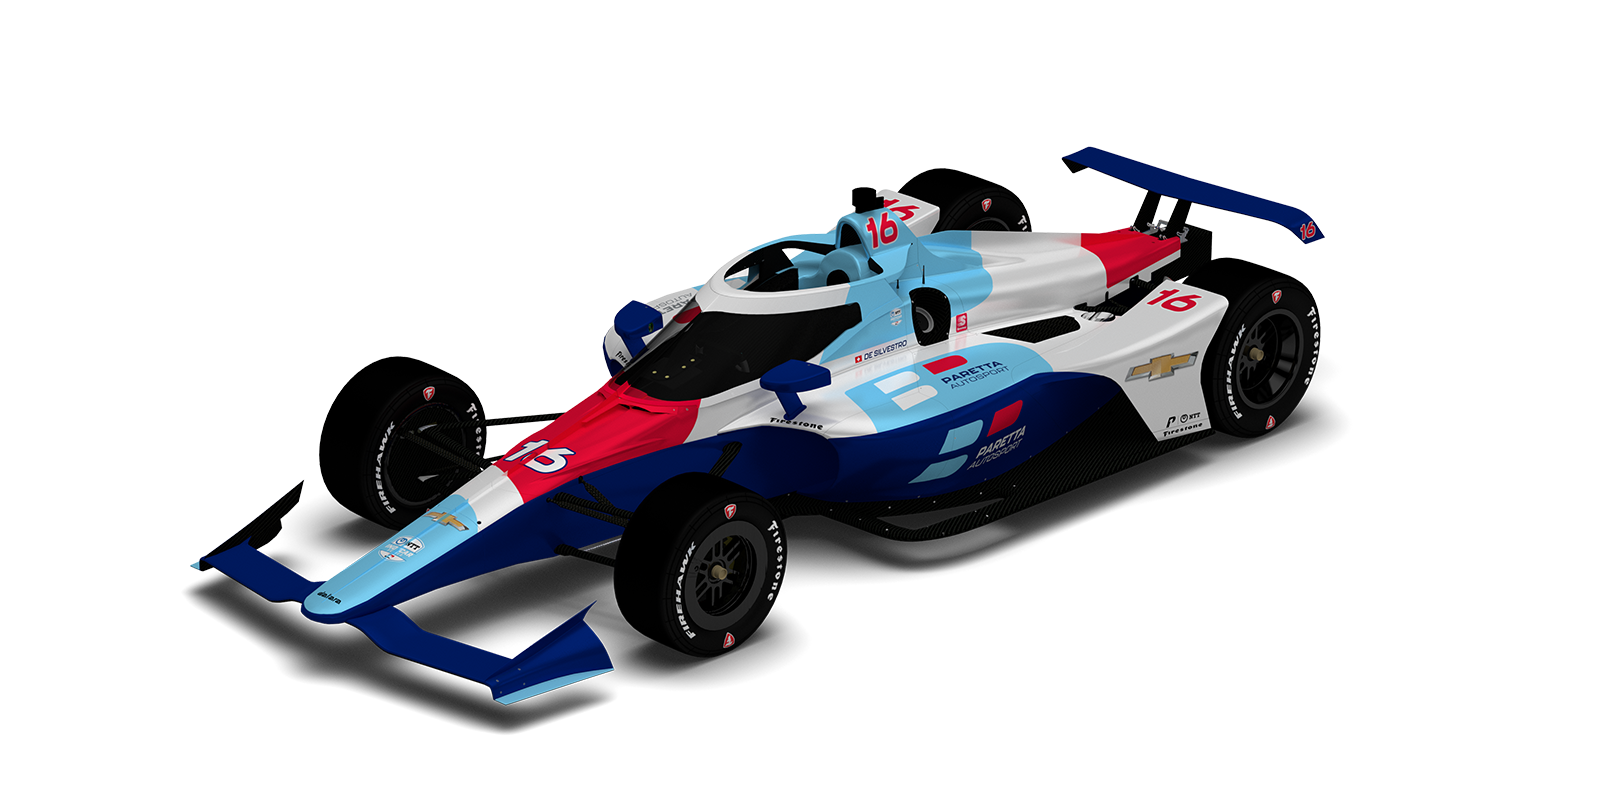 Female-led ownership group launches  new NTT INDYCAR SERIES team